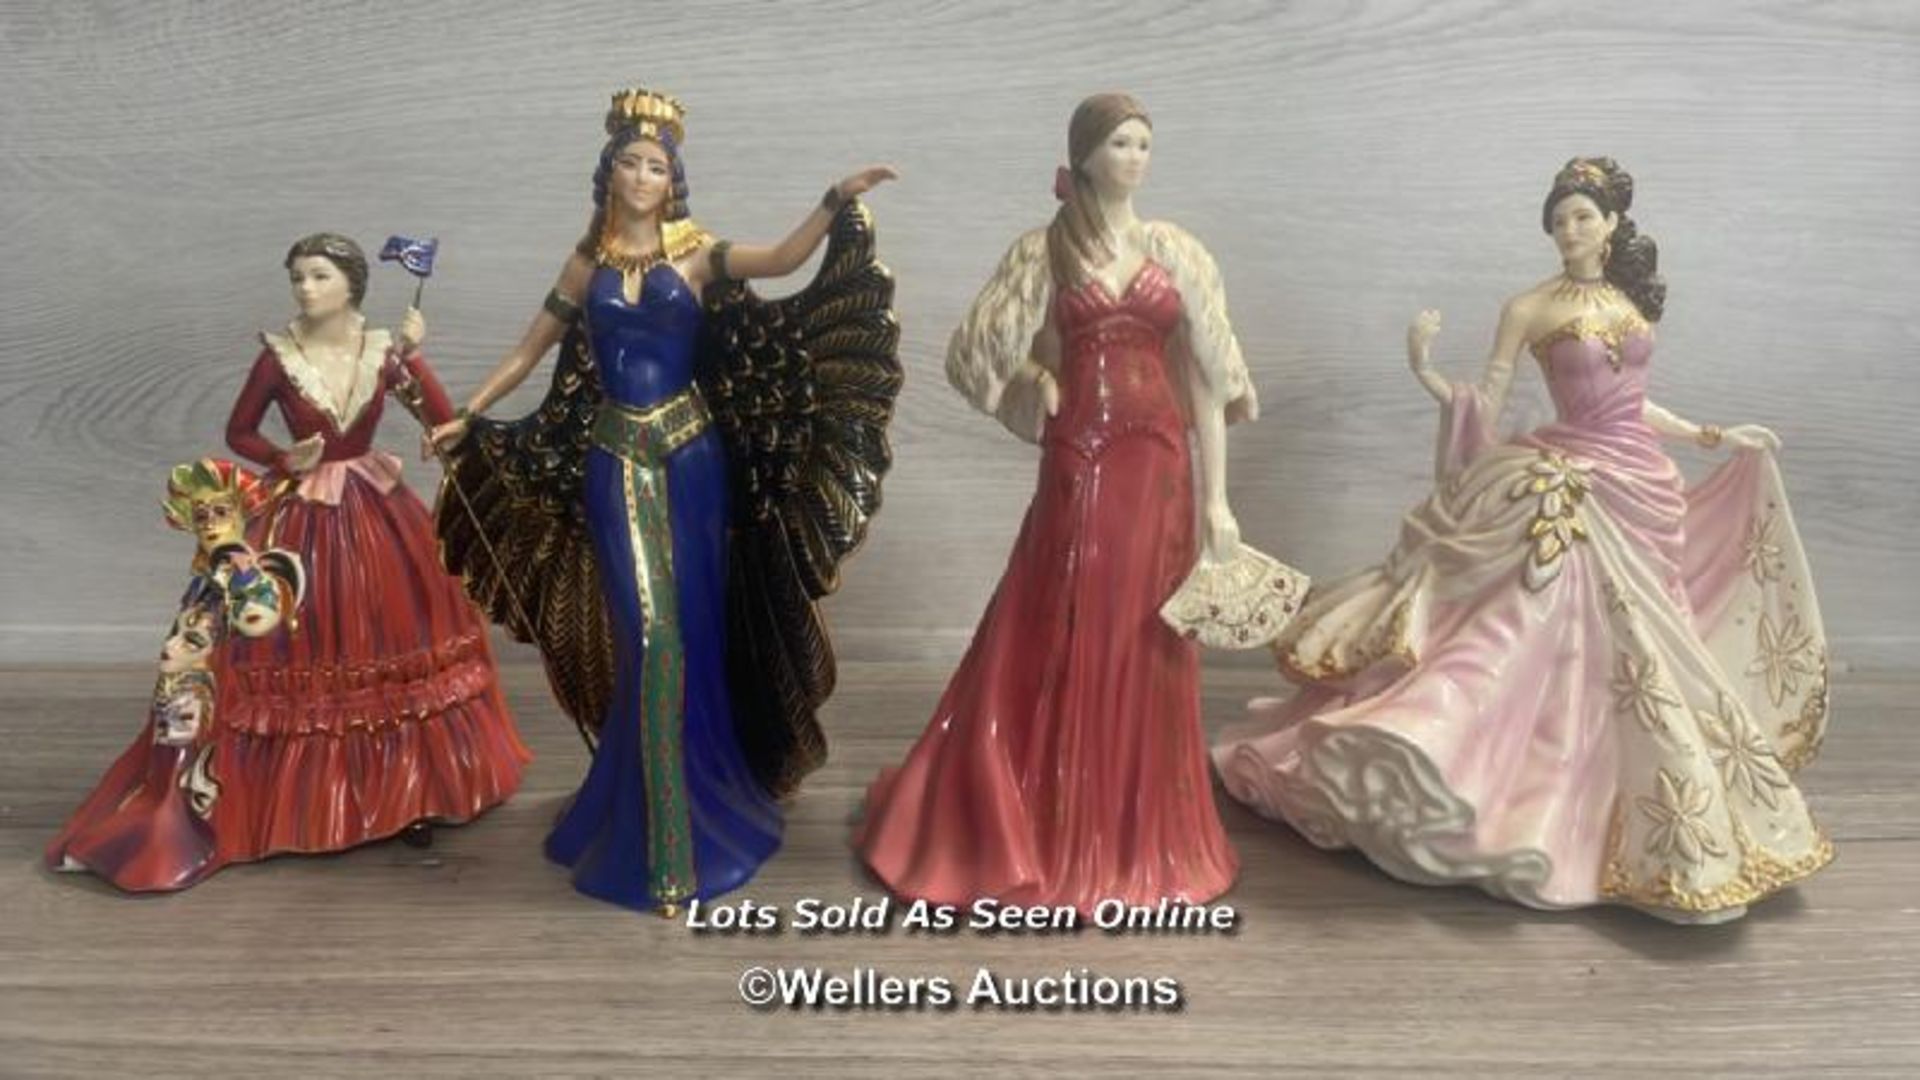 FOUR FIGURINES INCLUDING THE MASK SELLER, CLEOPATRA, JENNIFER AND ANASTASIA